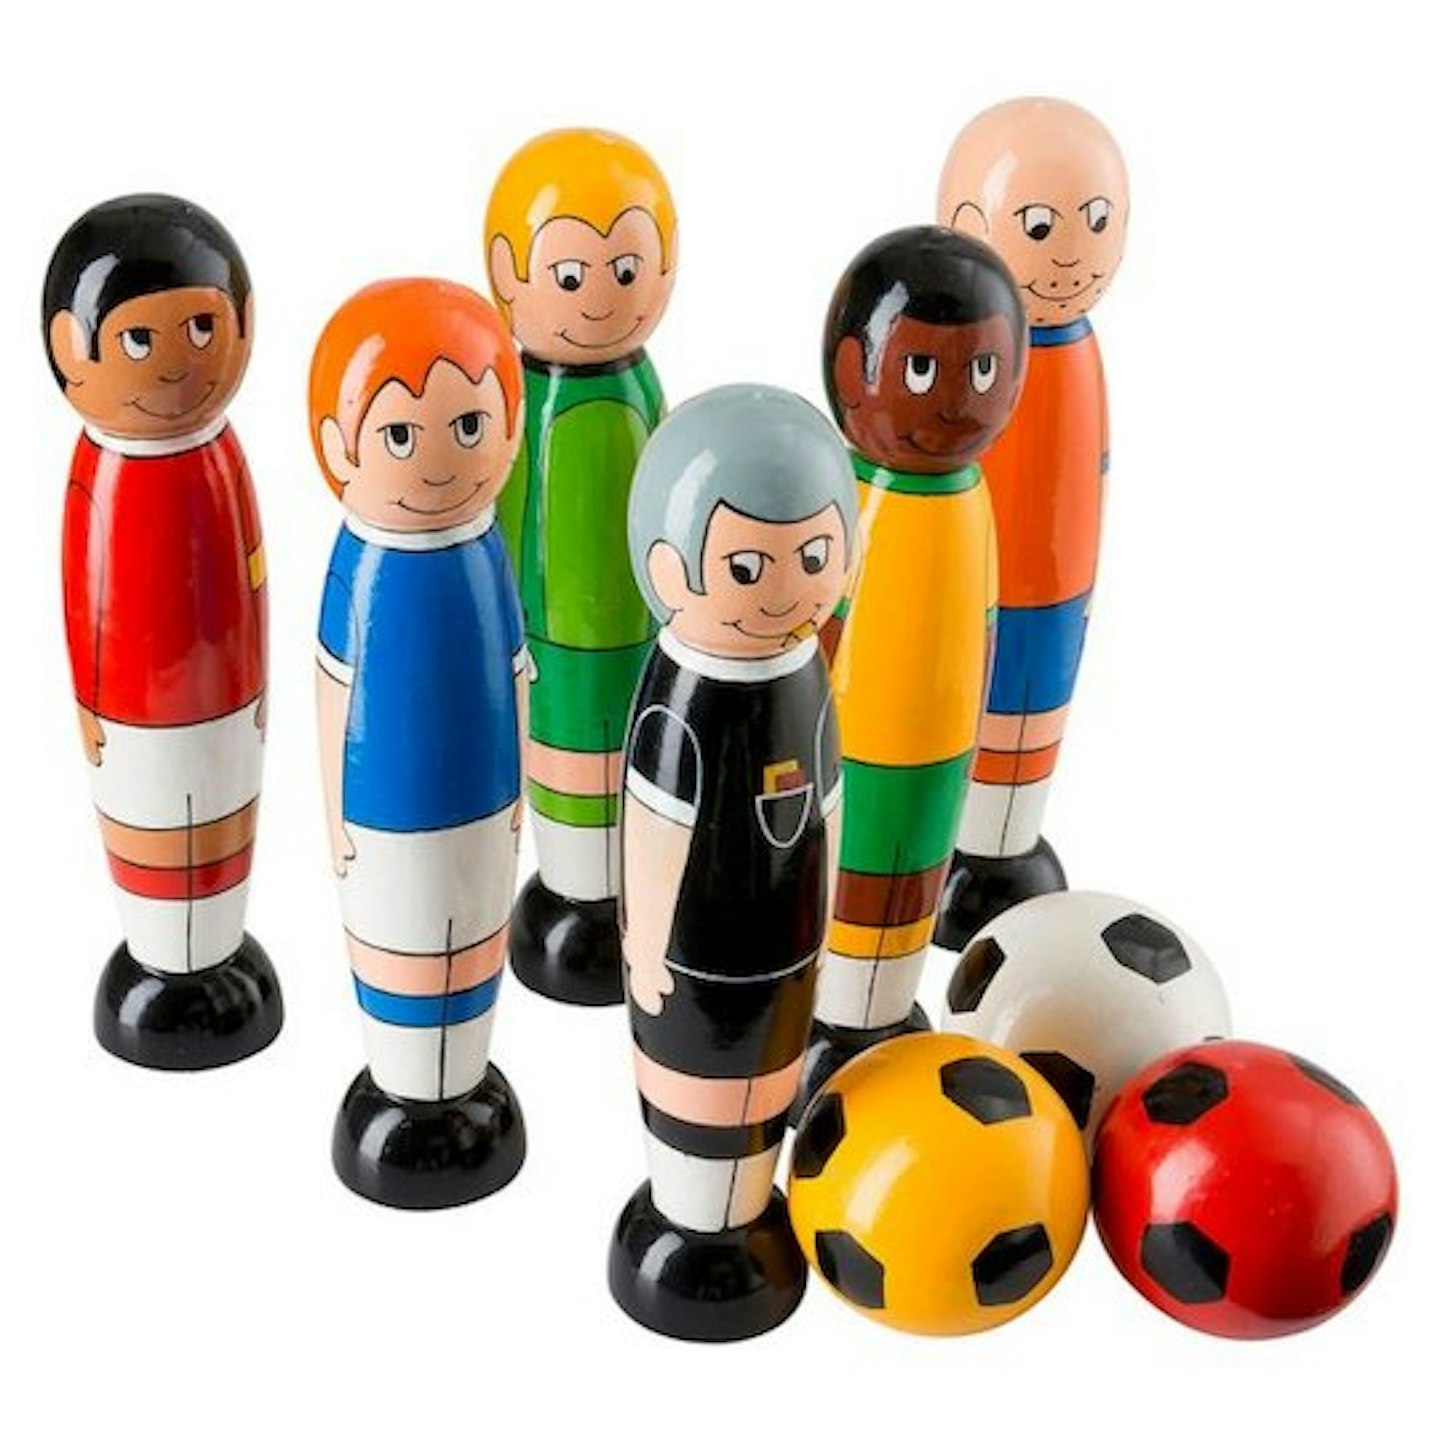 diverse and multicultural toys 